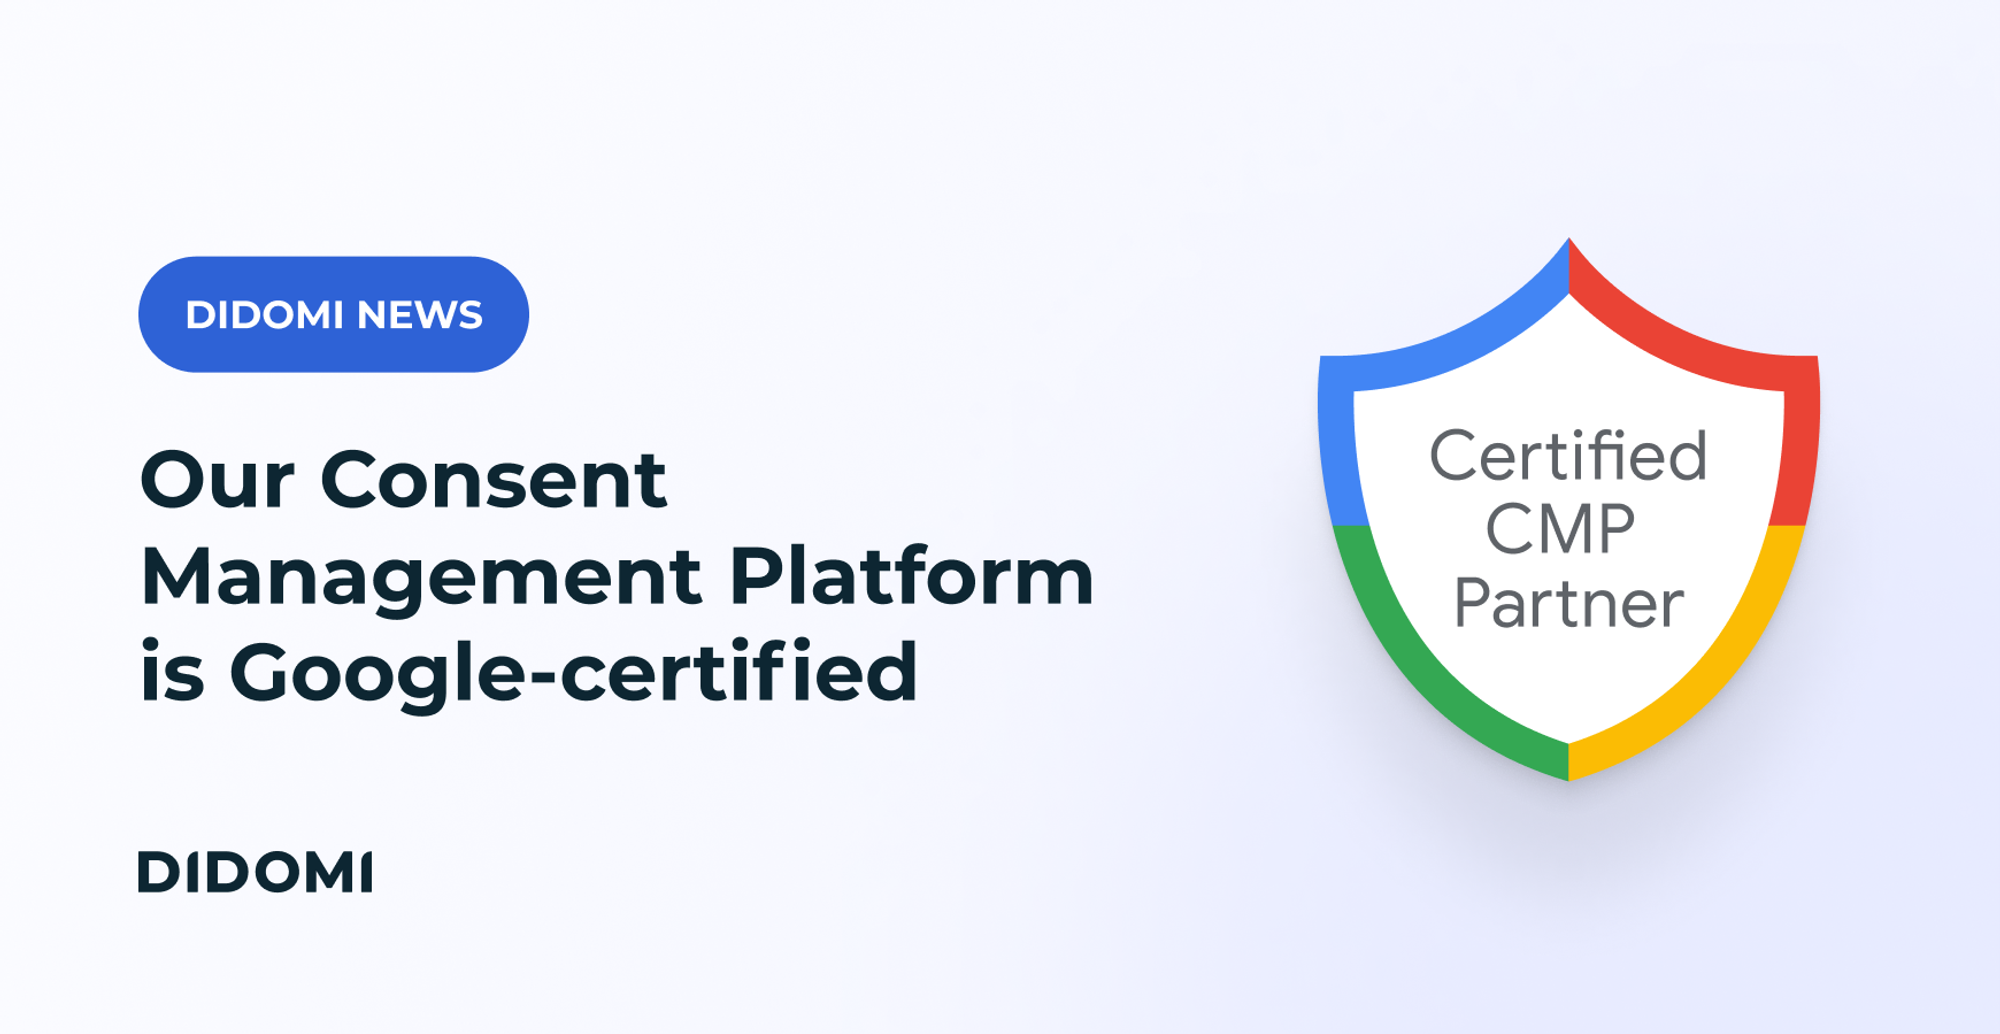 The headline "Didomi Consent Management Platform CMP is certified by Google" is accompanied by the words "Didomi news" and, on the right of the image, there's a badge in Google's colors with the words "Certified CMP Partner".